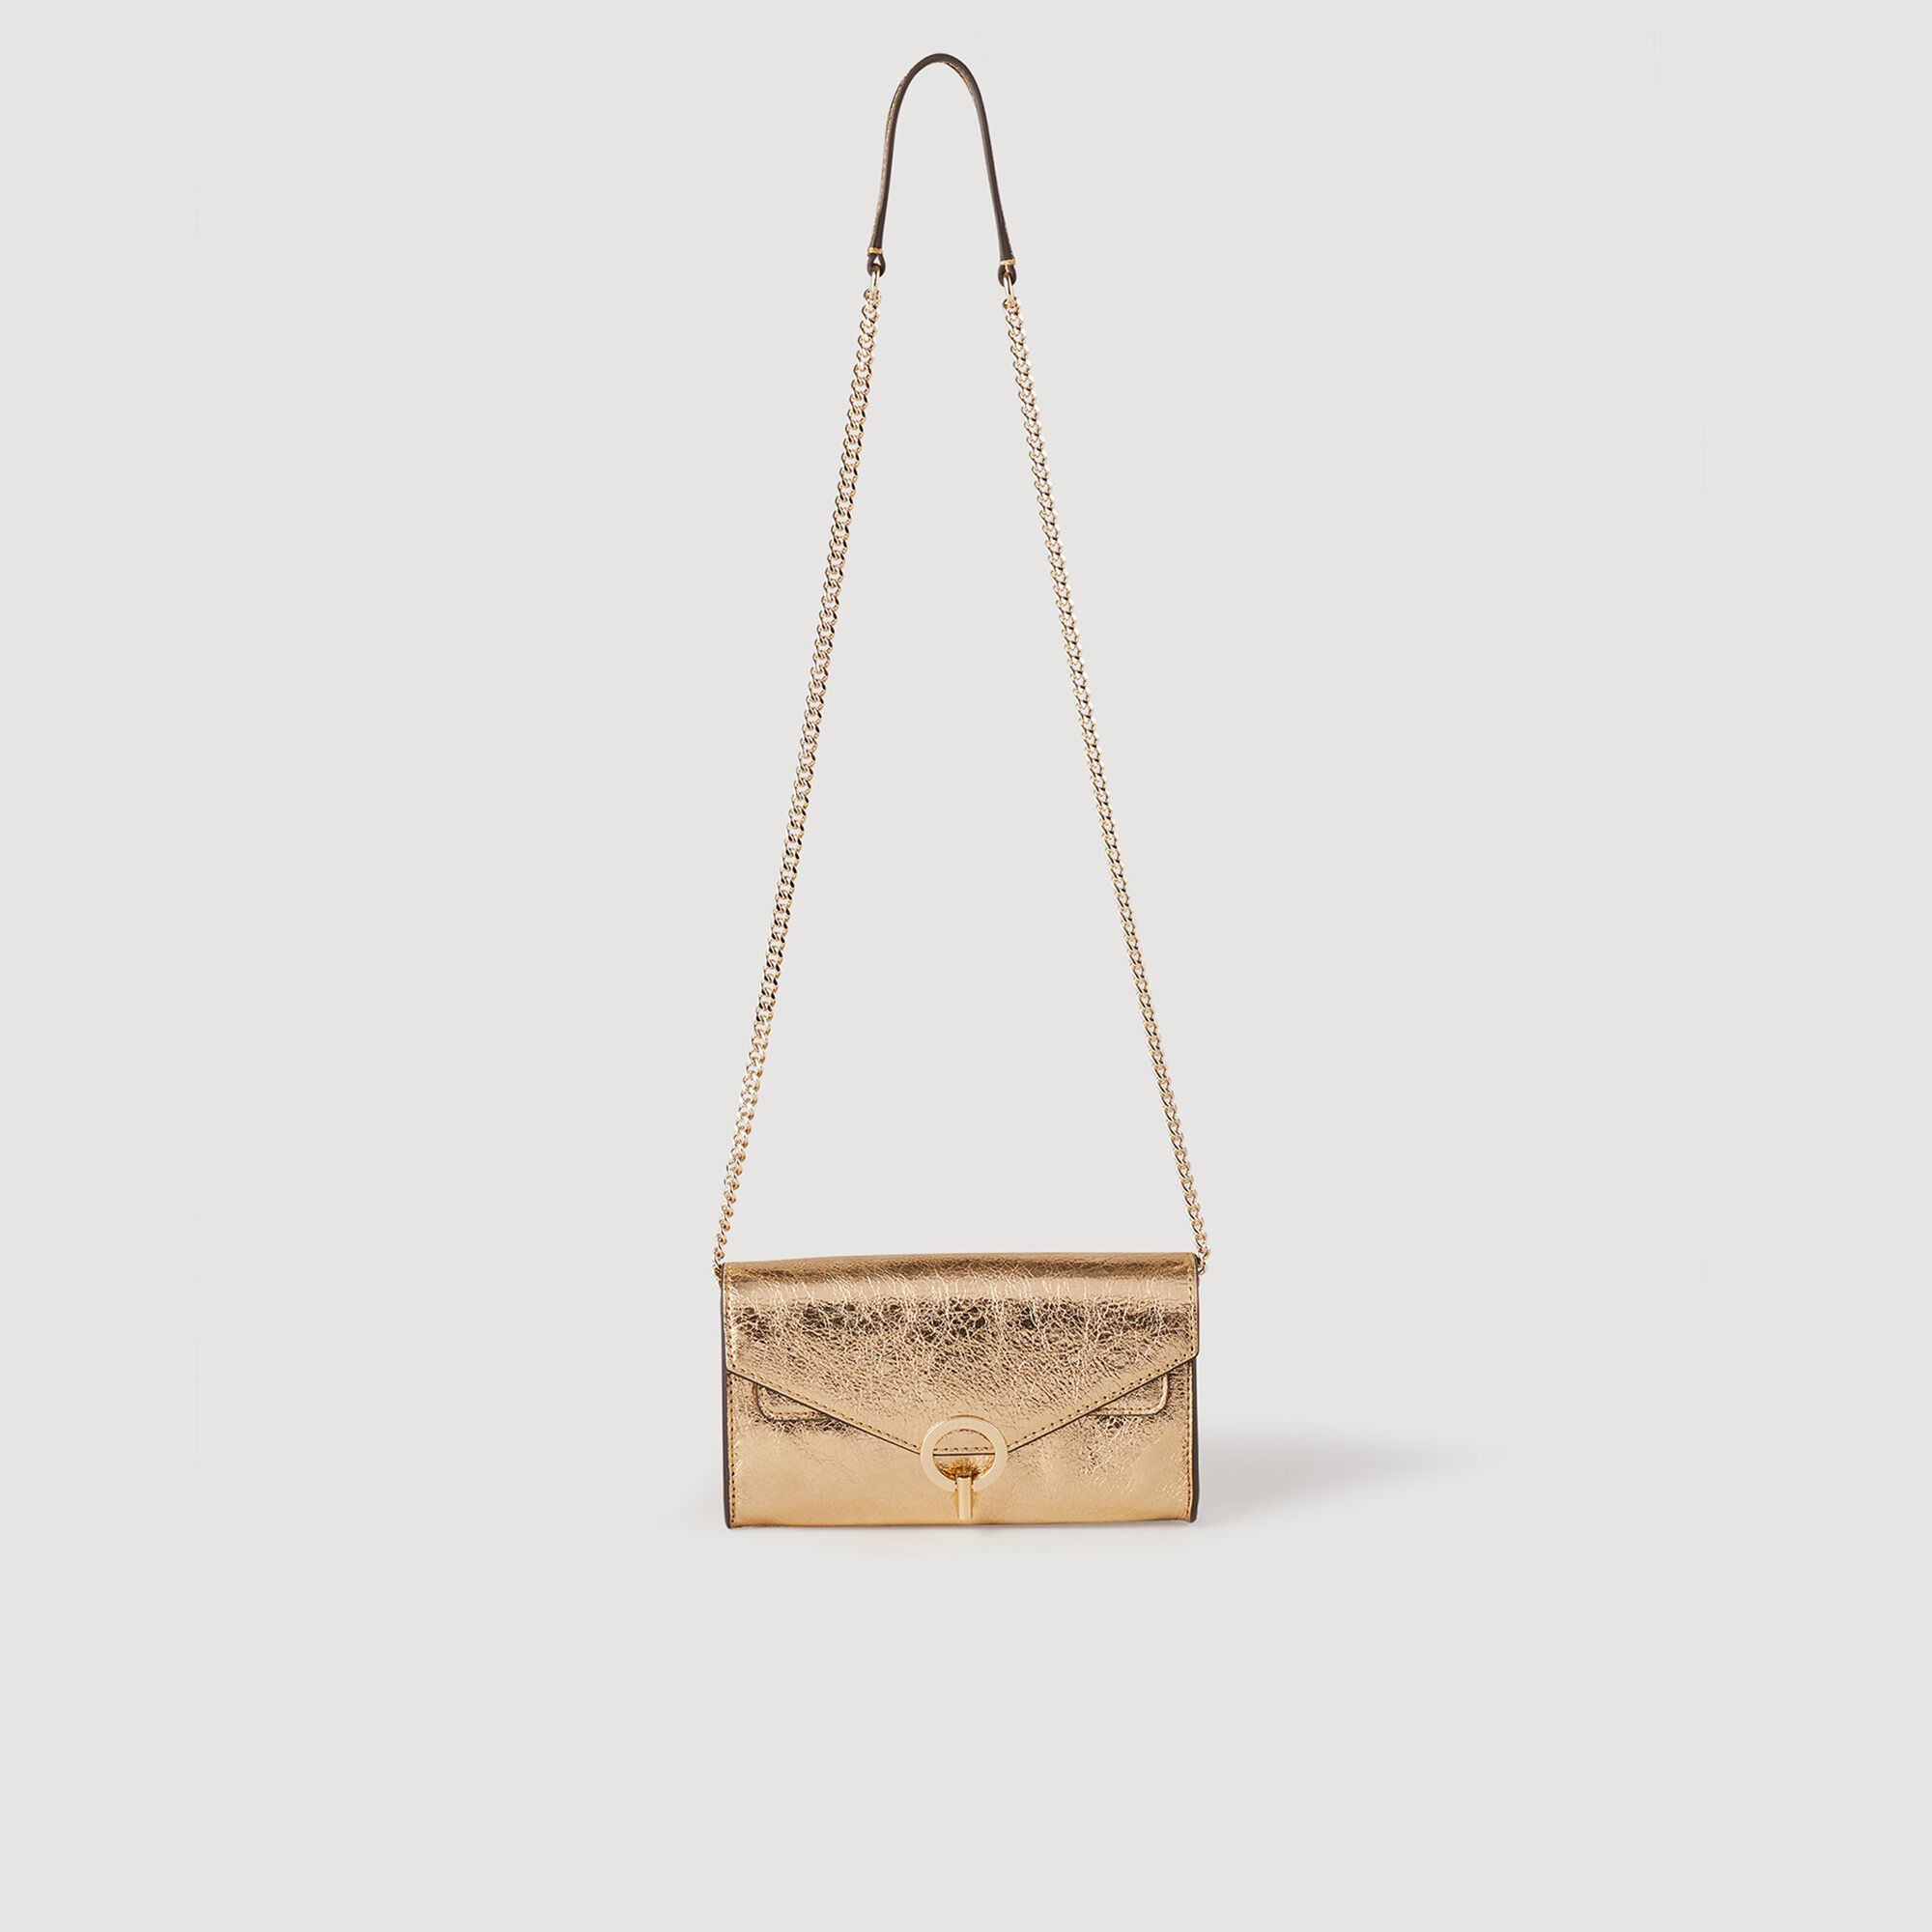 Buy Gold Embellished Pearl Half Moon Bag by RICAMMO Online at Aza Fashions.